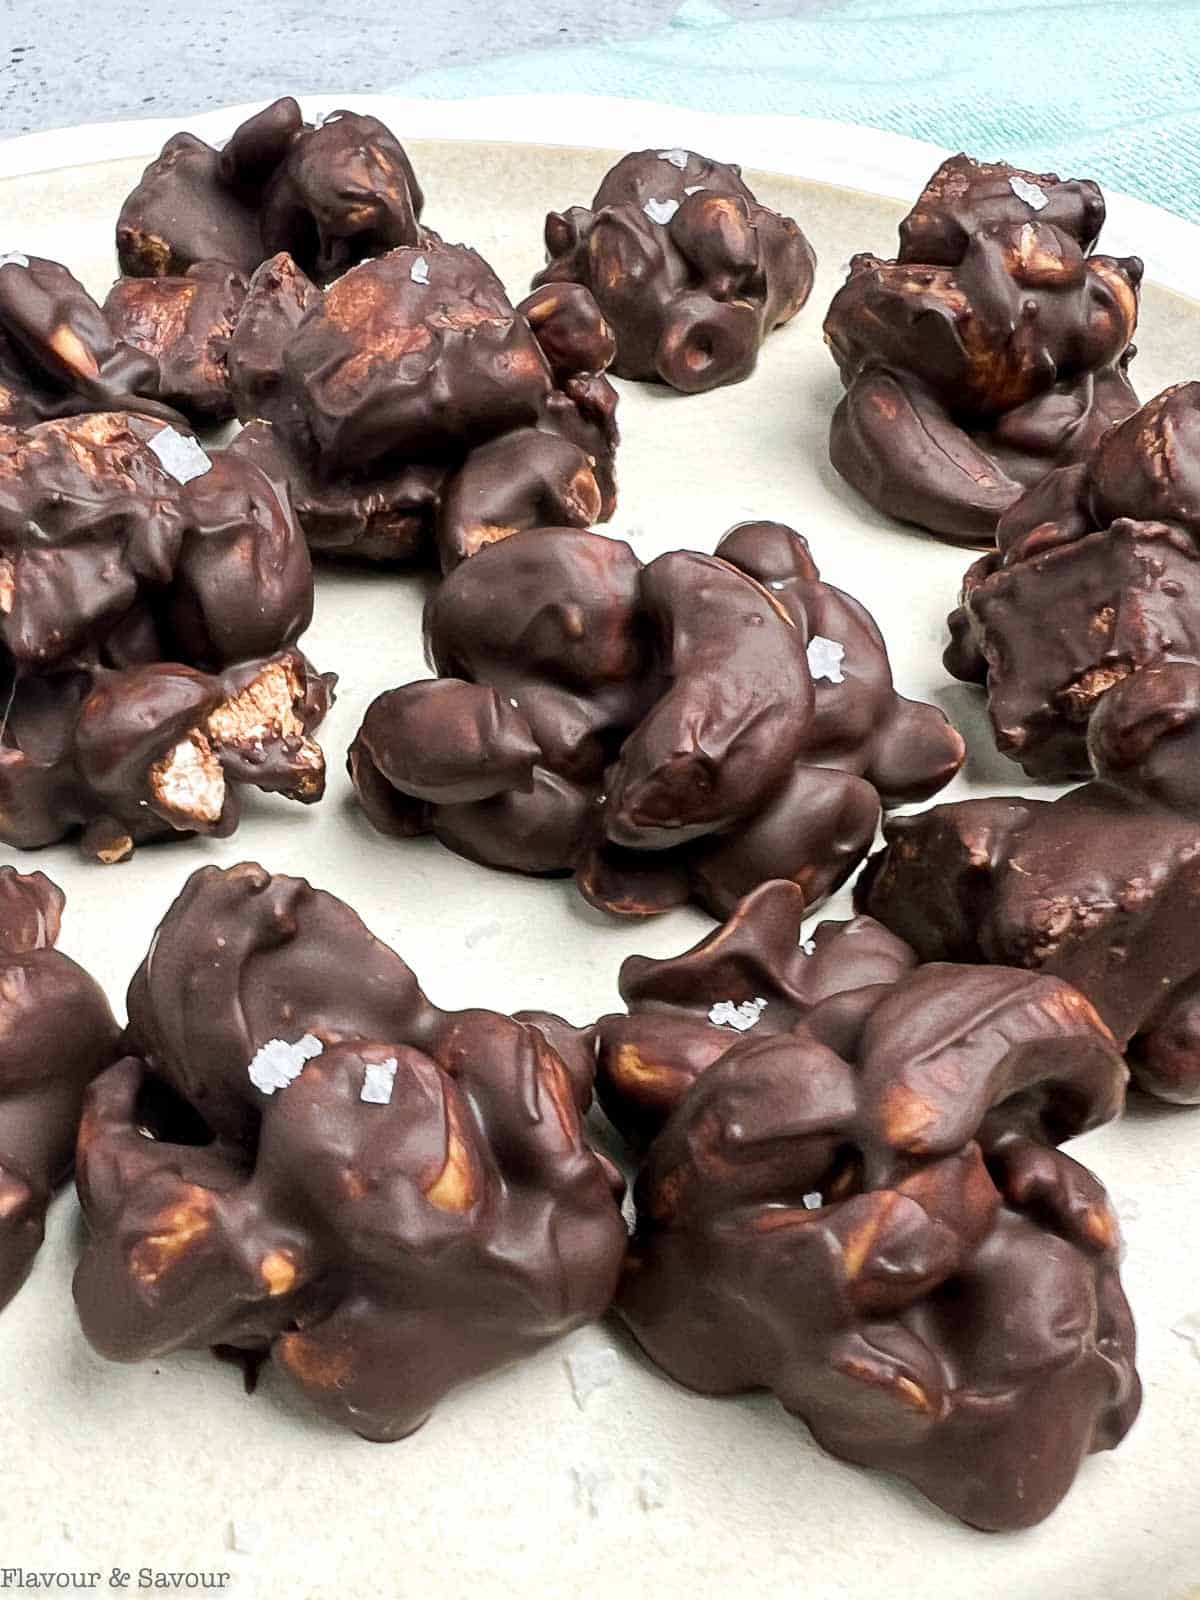 Close up view of chocolate covered cashew clusters made with cashews, peanuts and marshmallows.